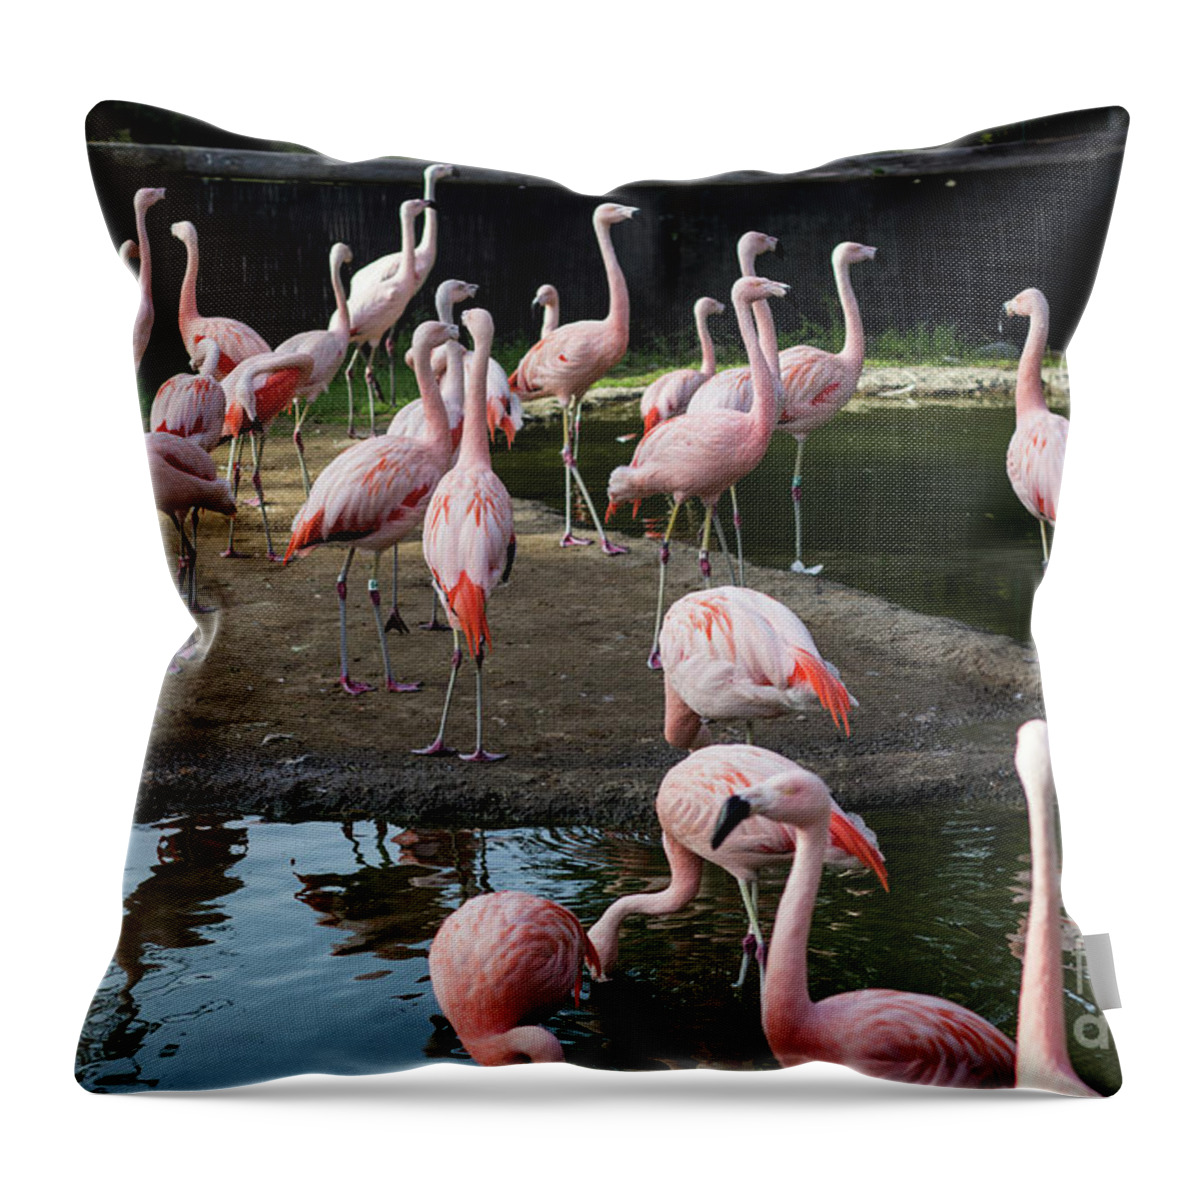 Flamingos Throw Pillow featuring the photograph Pink Flamingos by Suzanne Luft